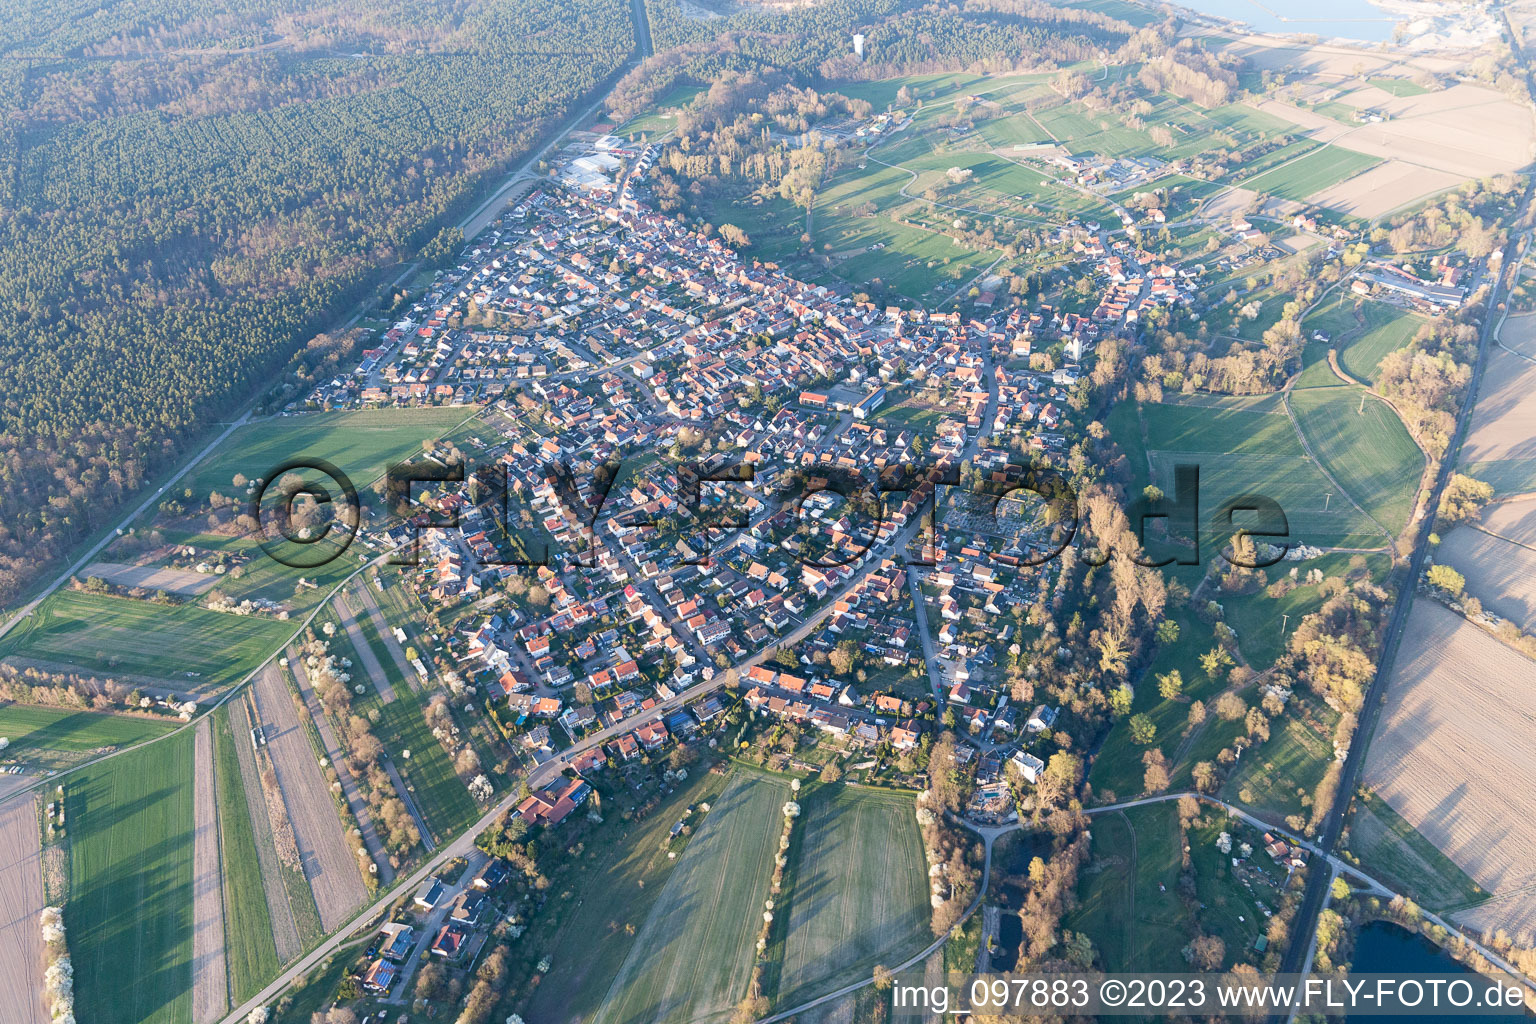 Berg in the state Rhineland-Palatinate, Germany seen from a drone